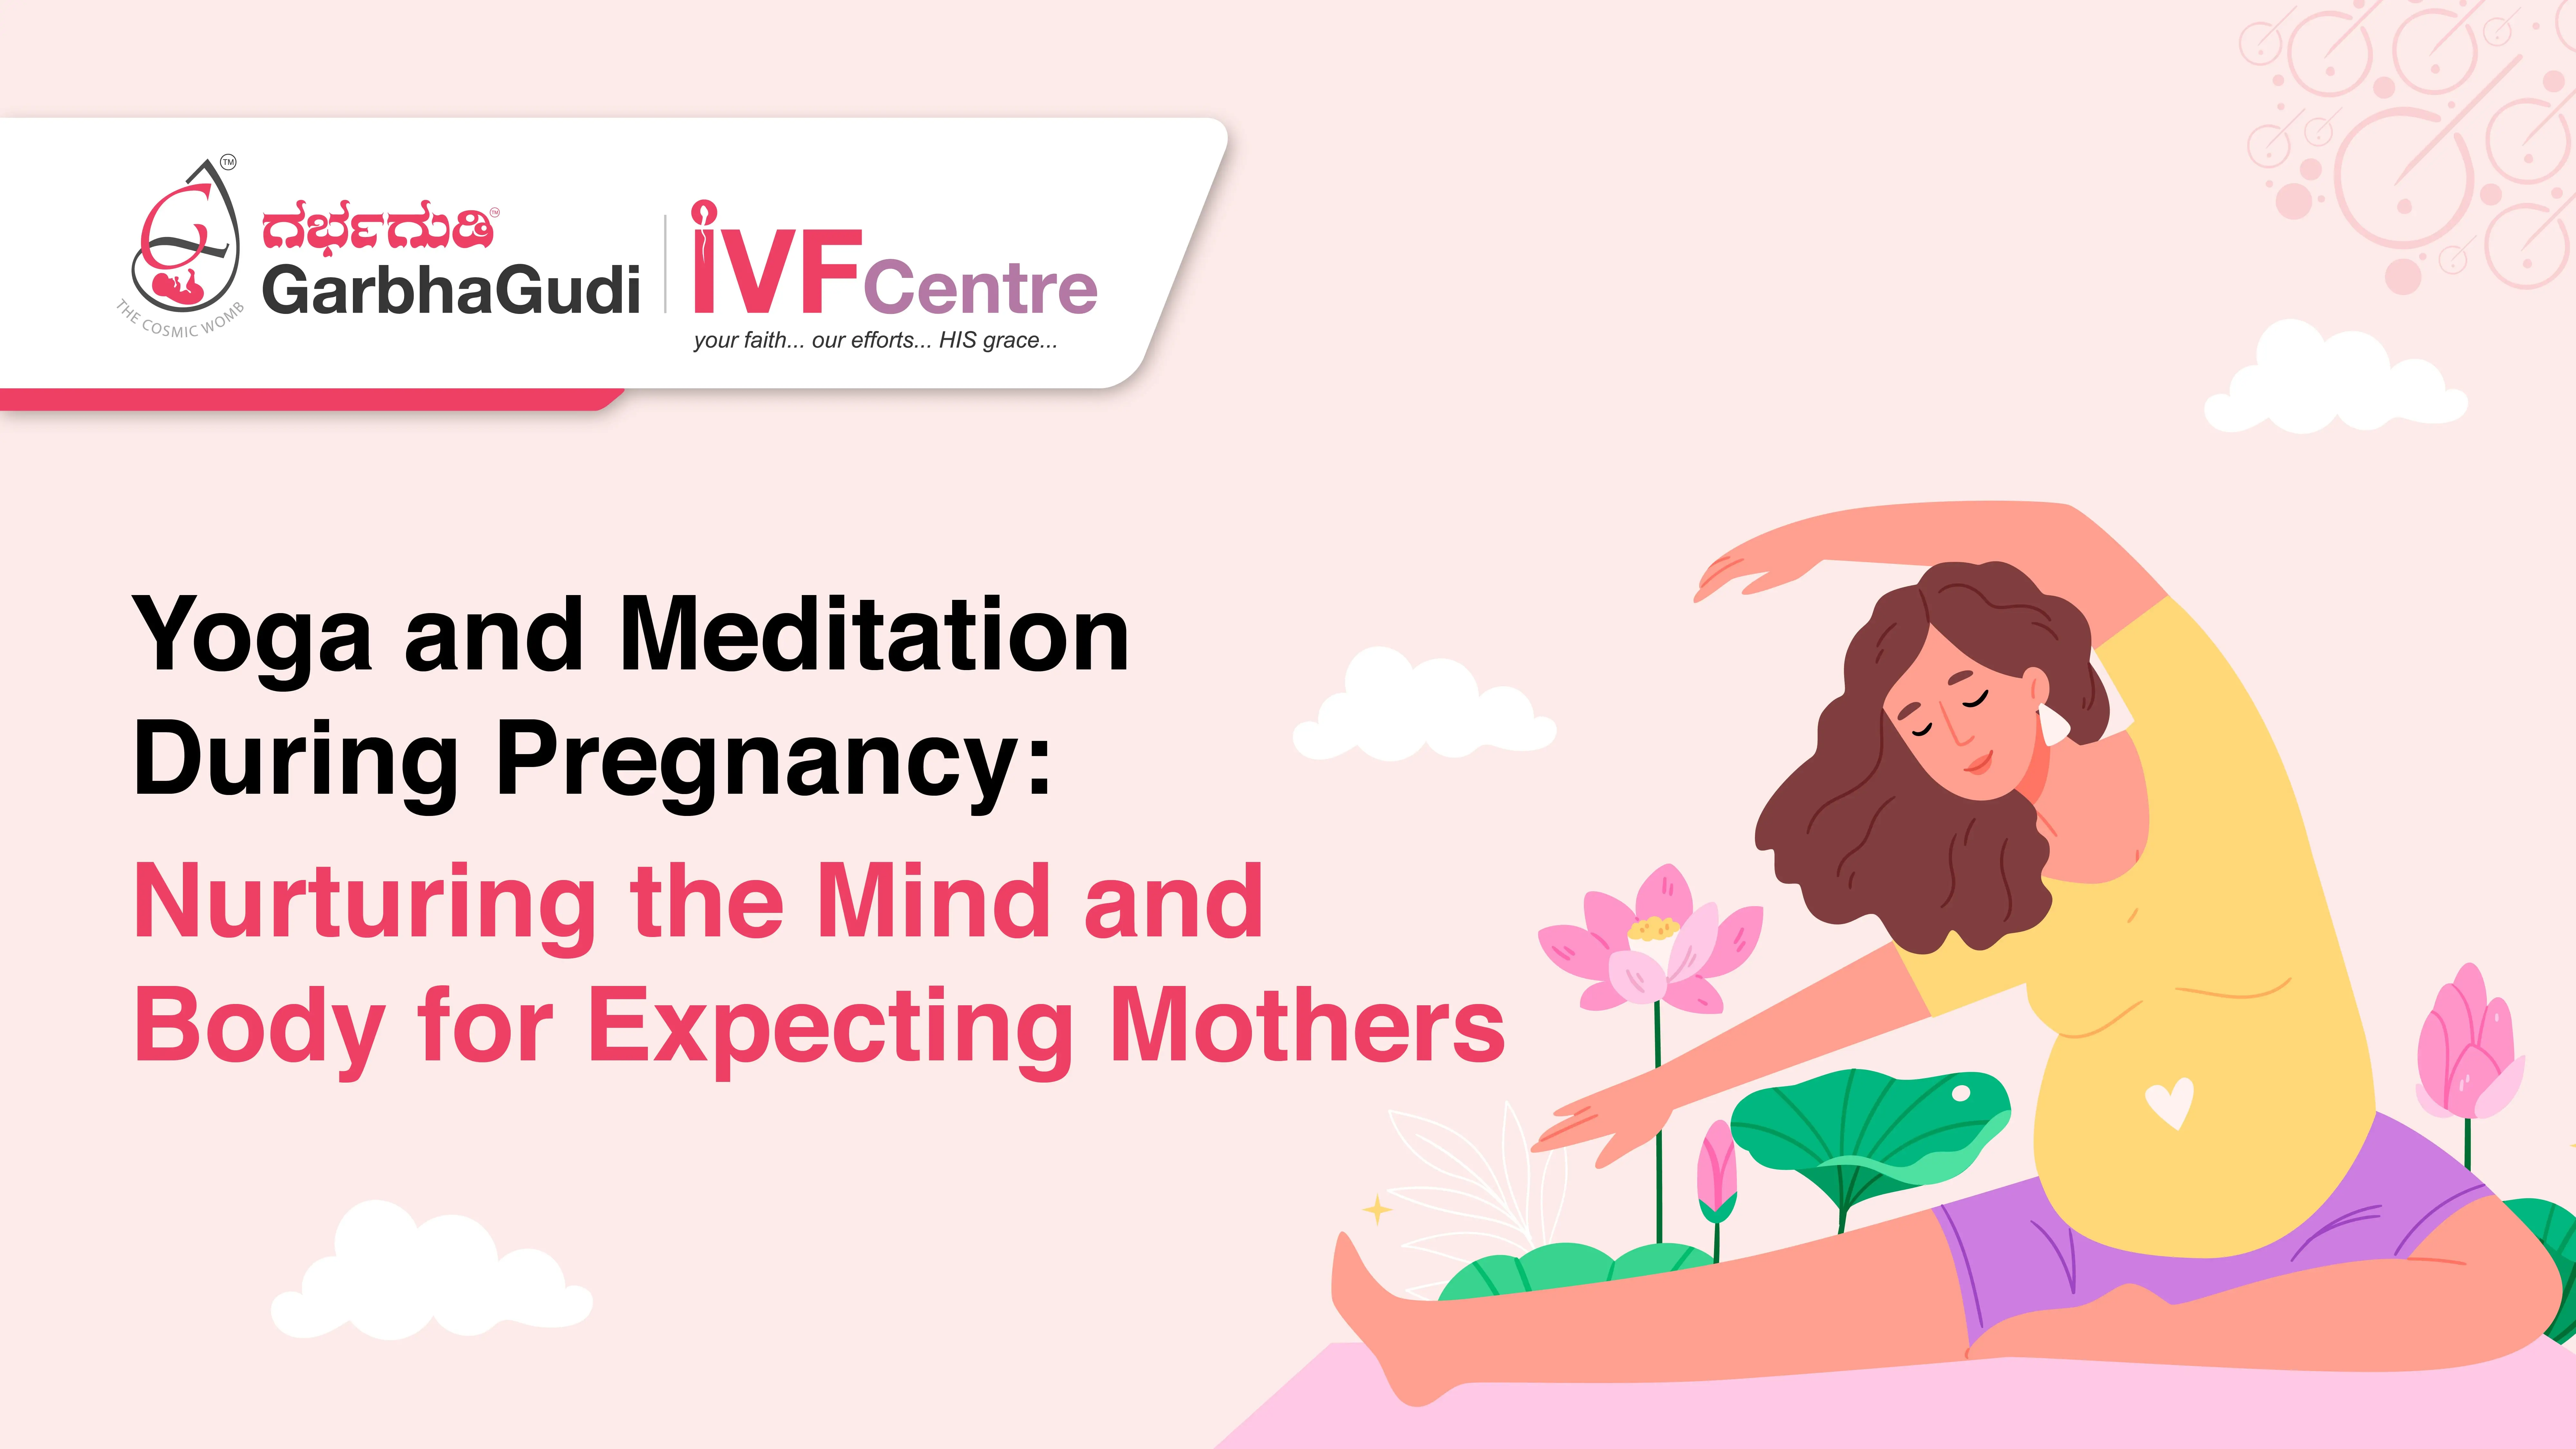 Yoga and Meditation During Pregnancy: Nurturing the Mind and Body for Expecting Mothers